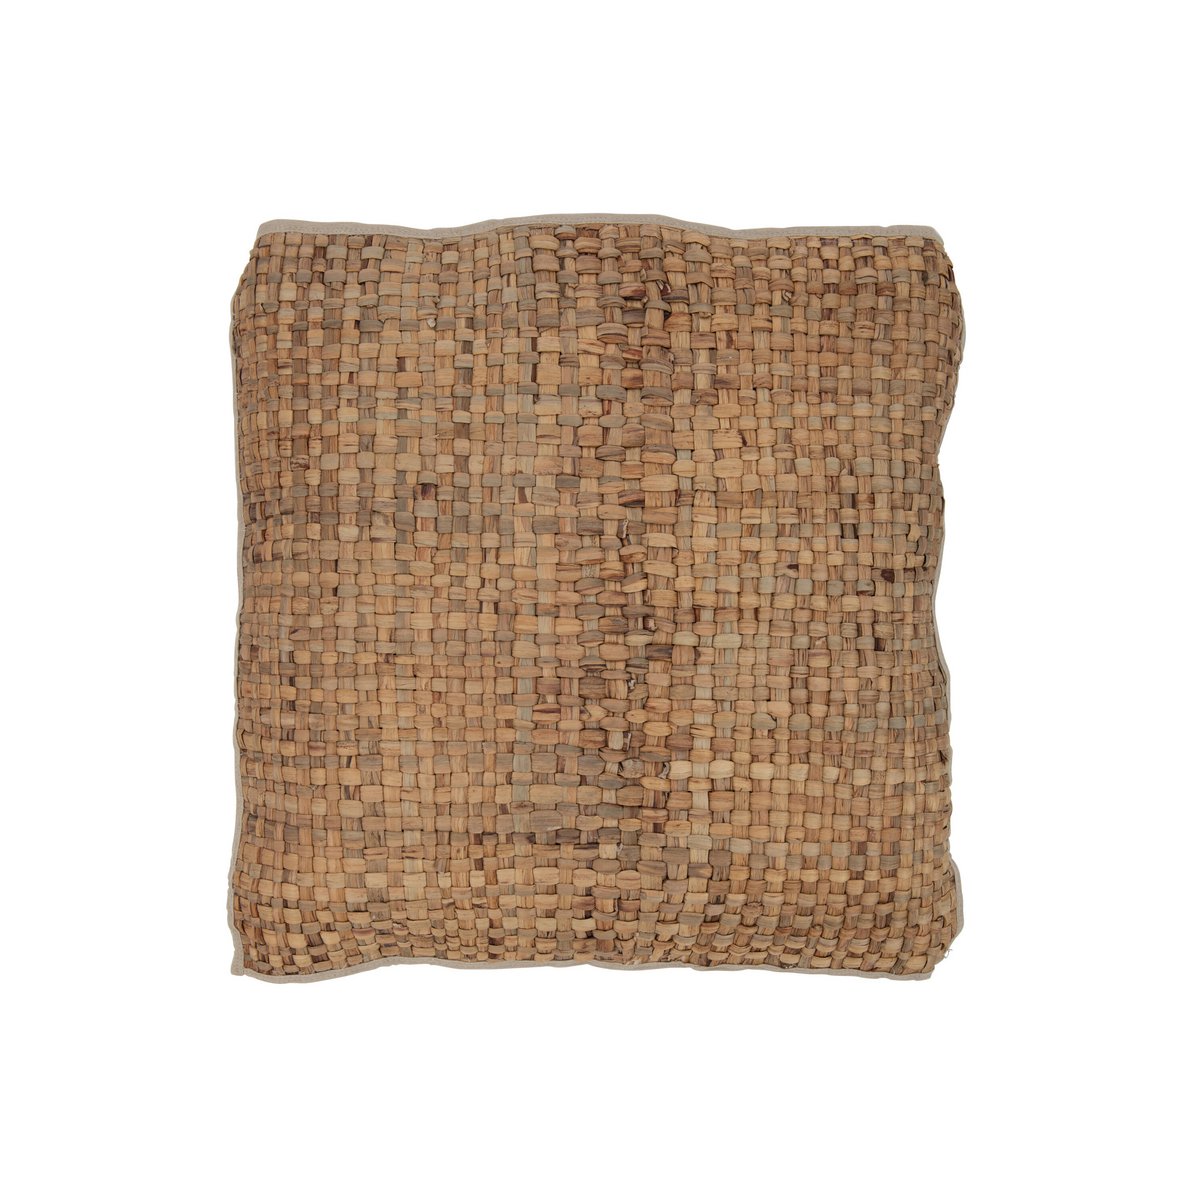 Bali cushion made of reed/textile - 65 x 65 cm - natural, large